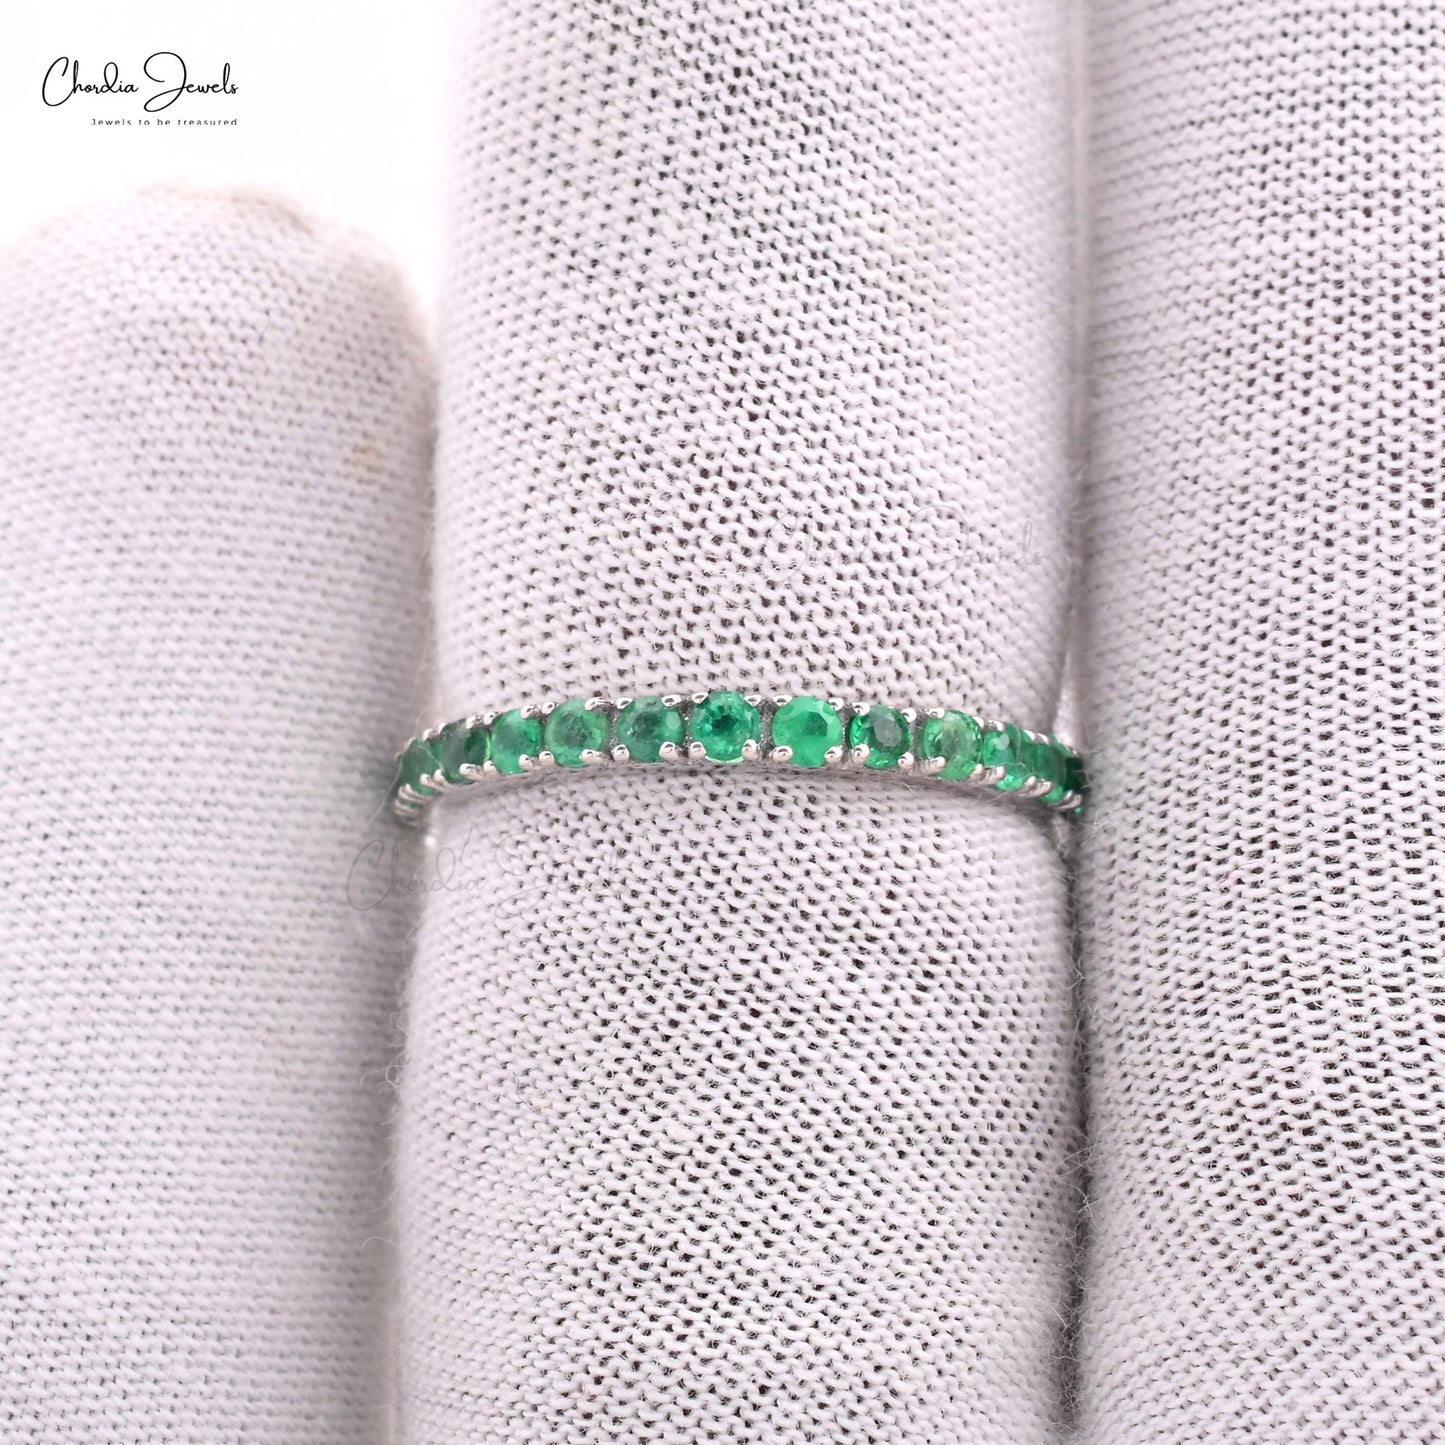 Adorn yourself with this 14k gold emerald ring